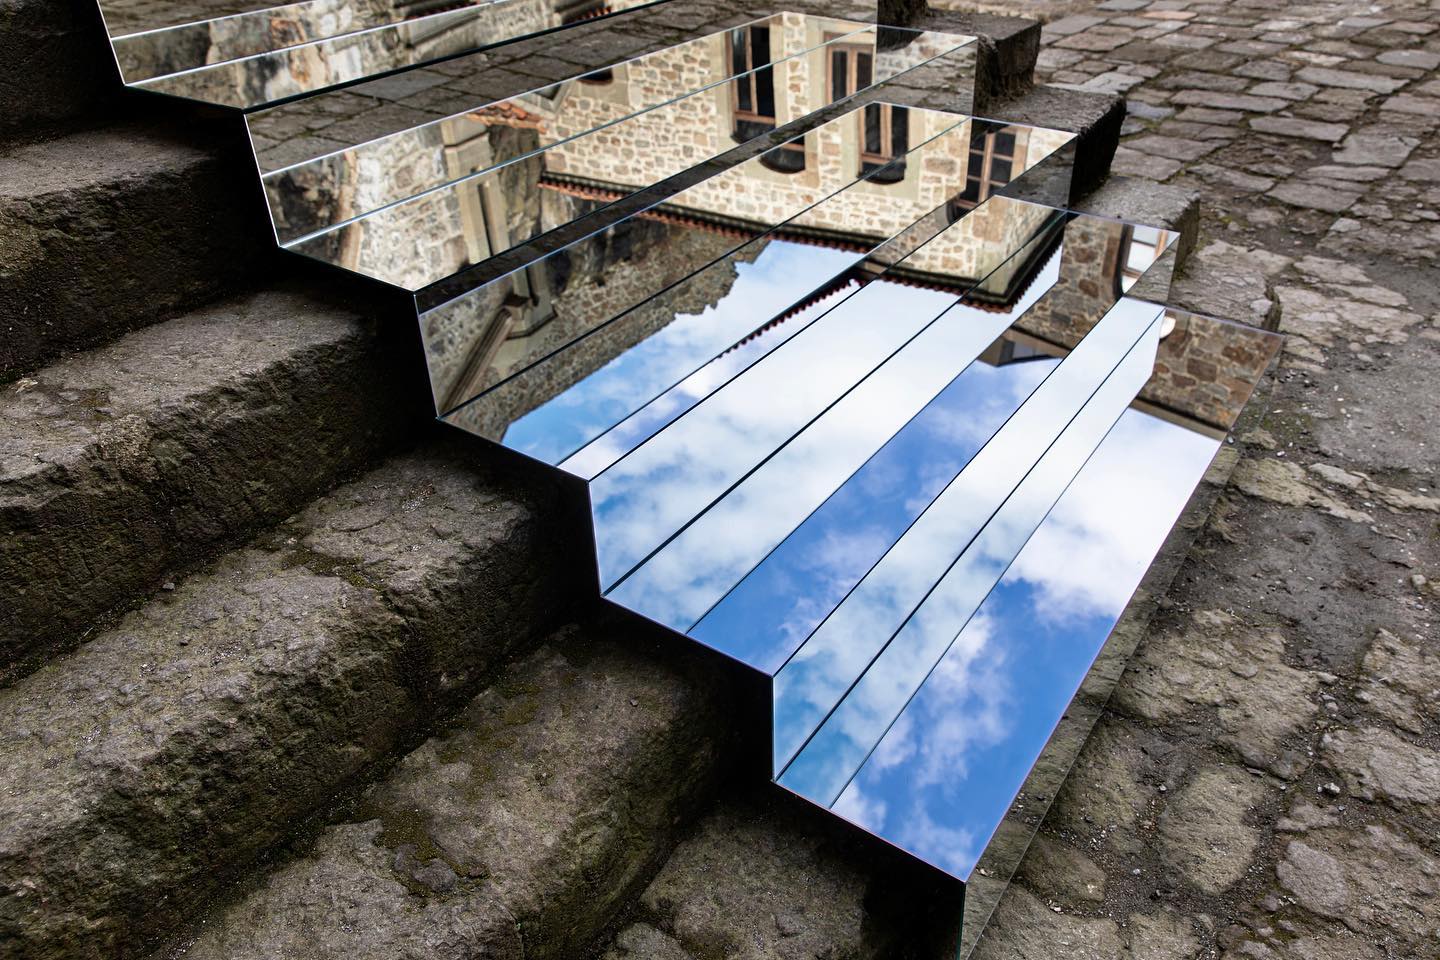 a photo of an art installation using mirrors reflecting the surroundings